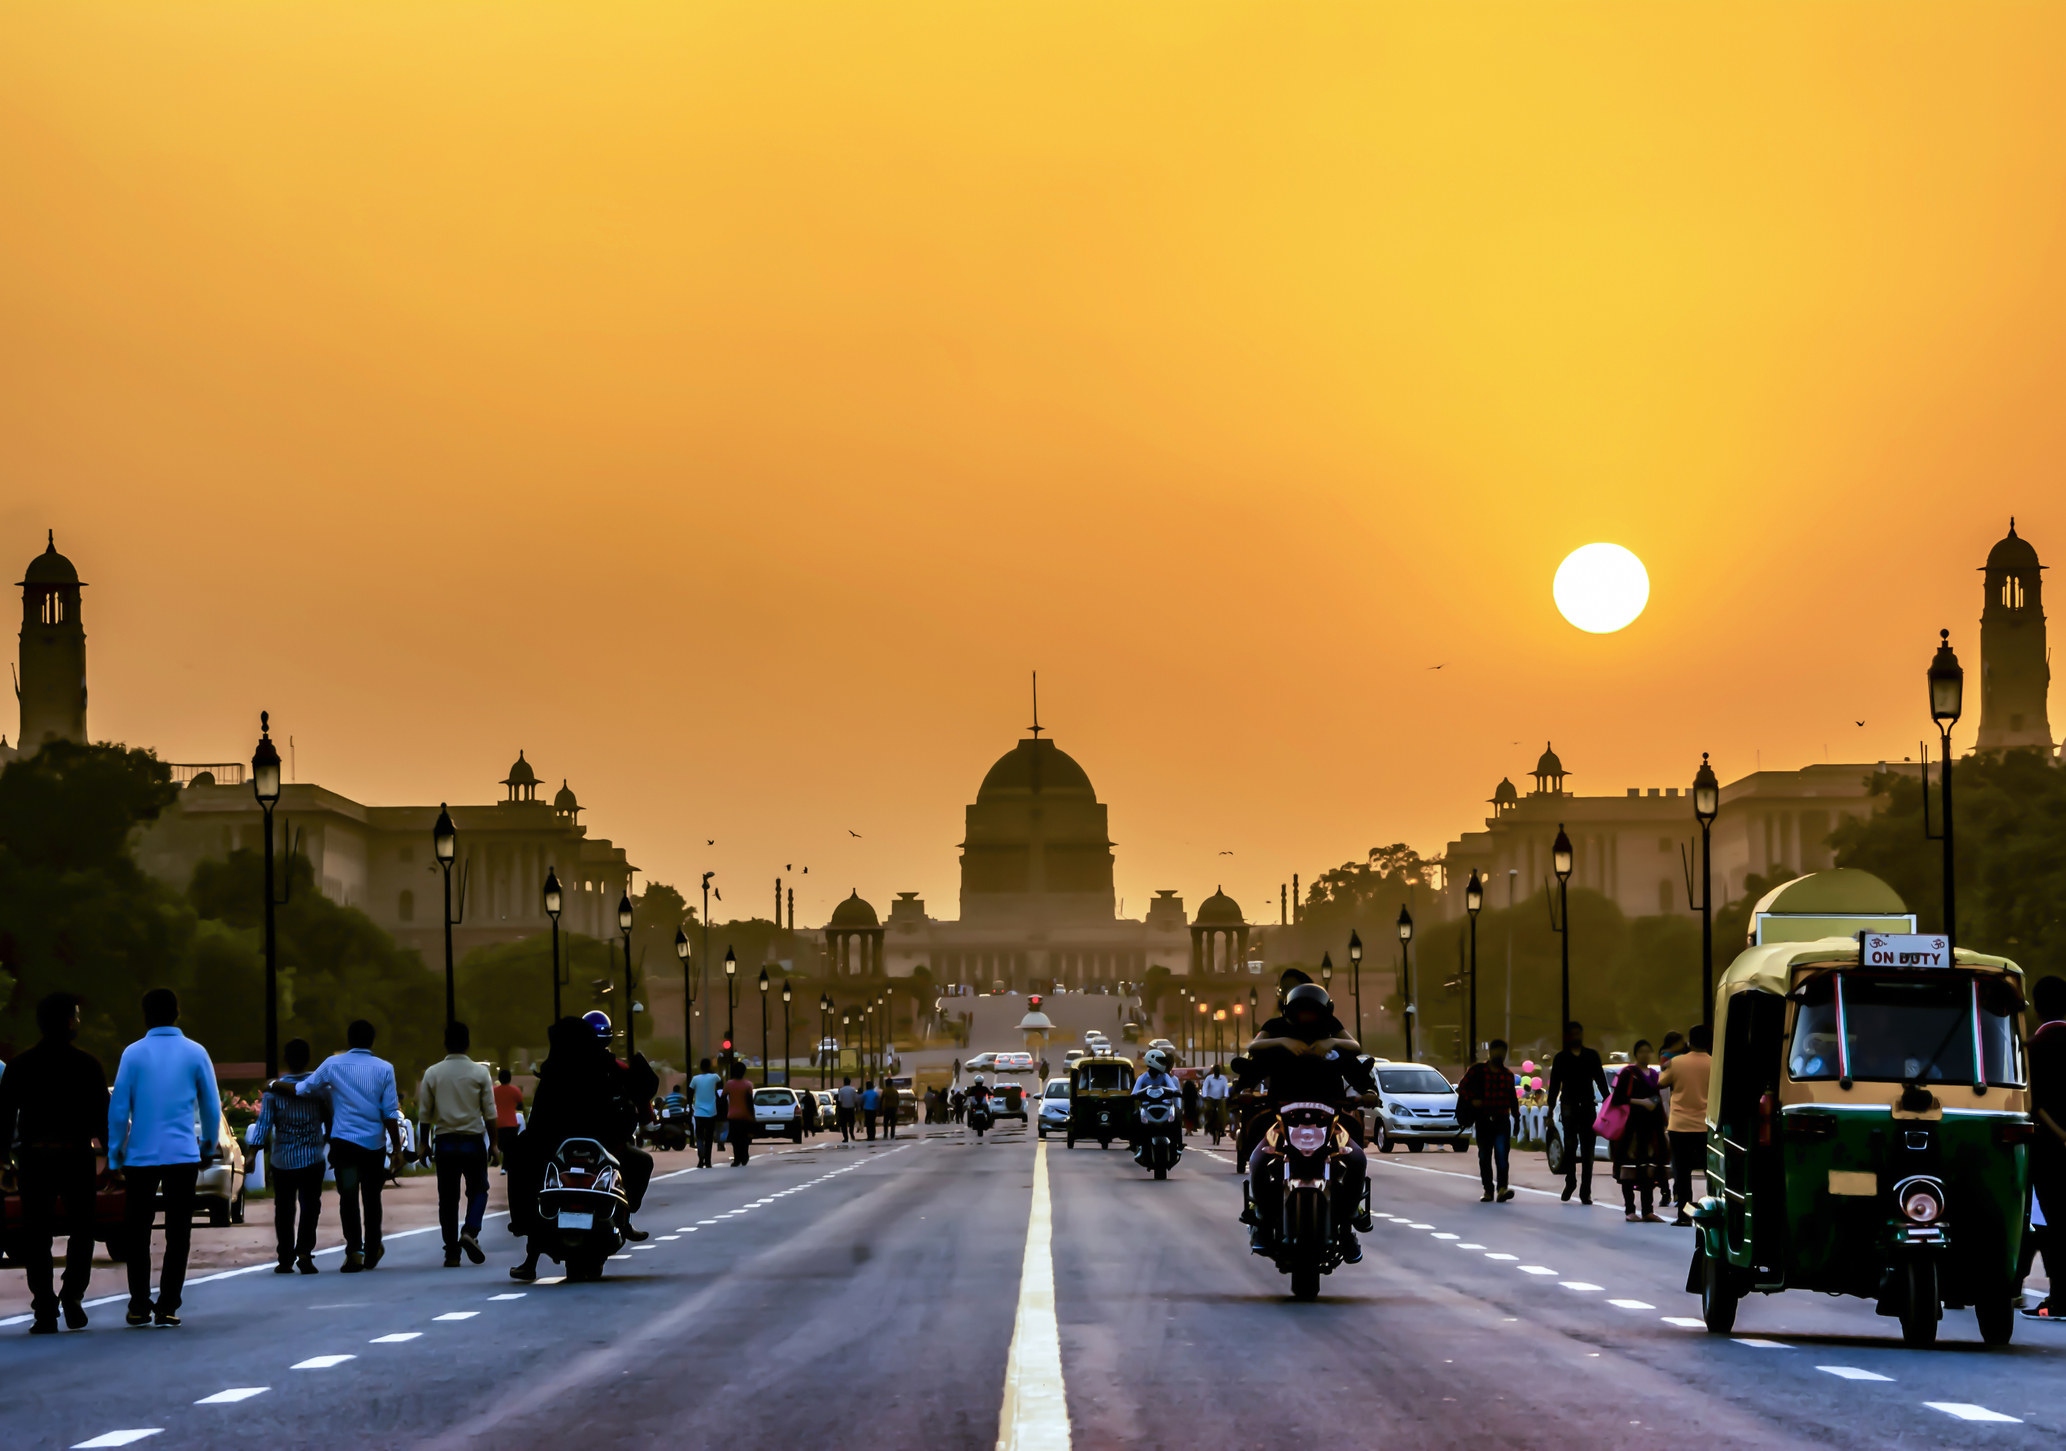 A busy street in India during sunset